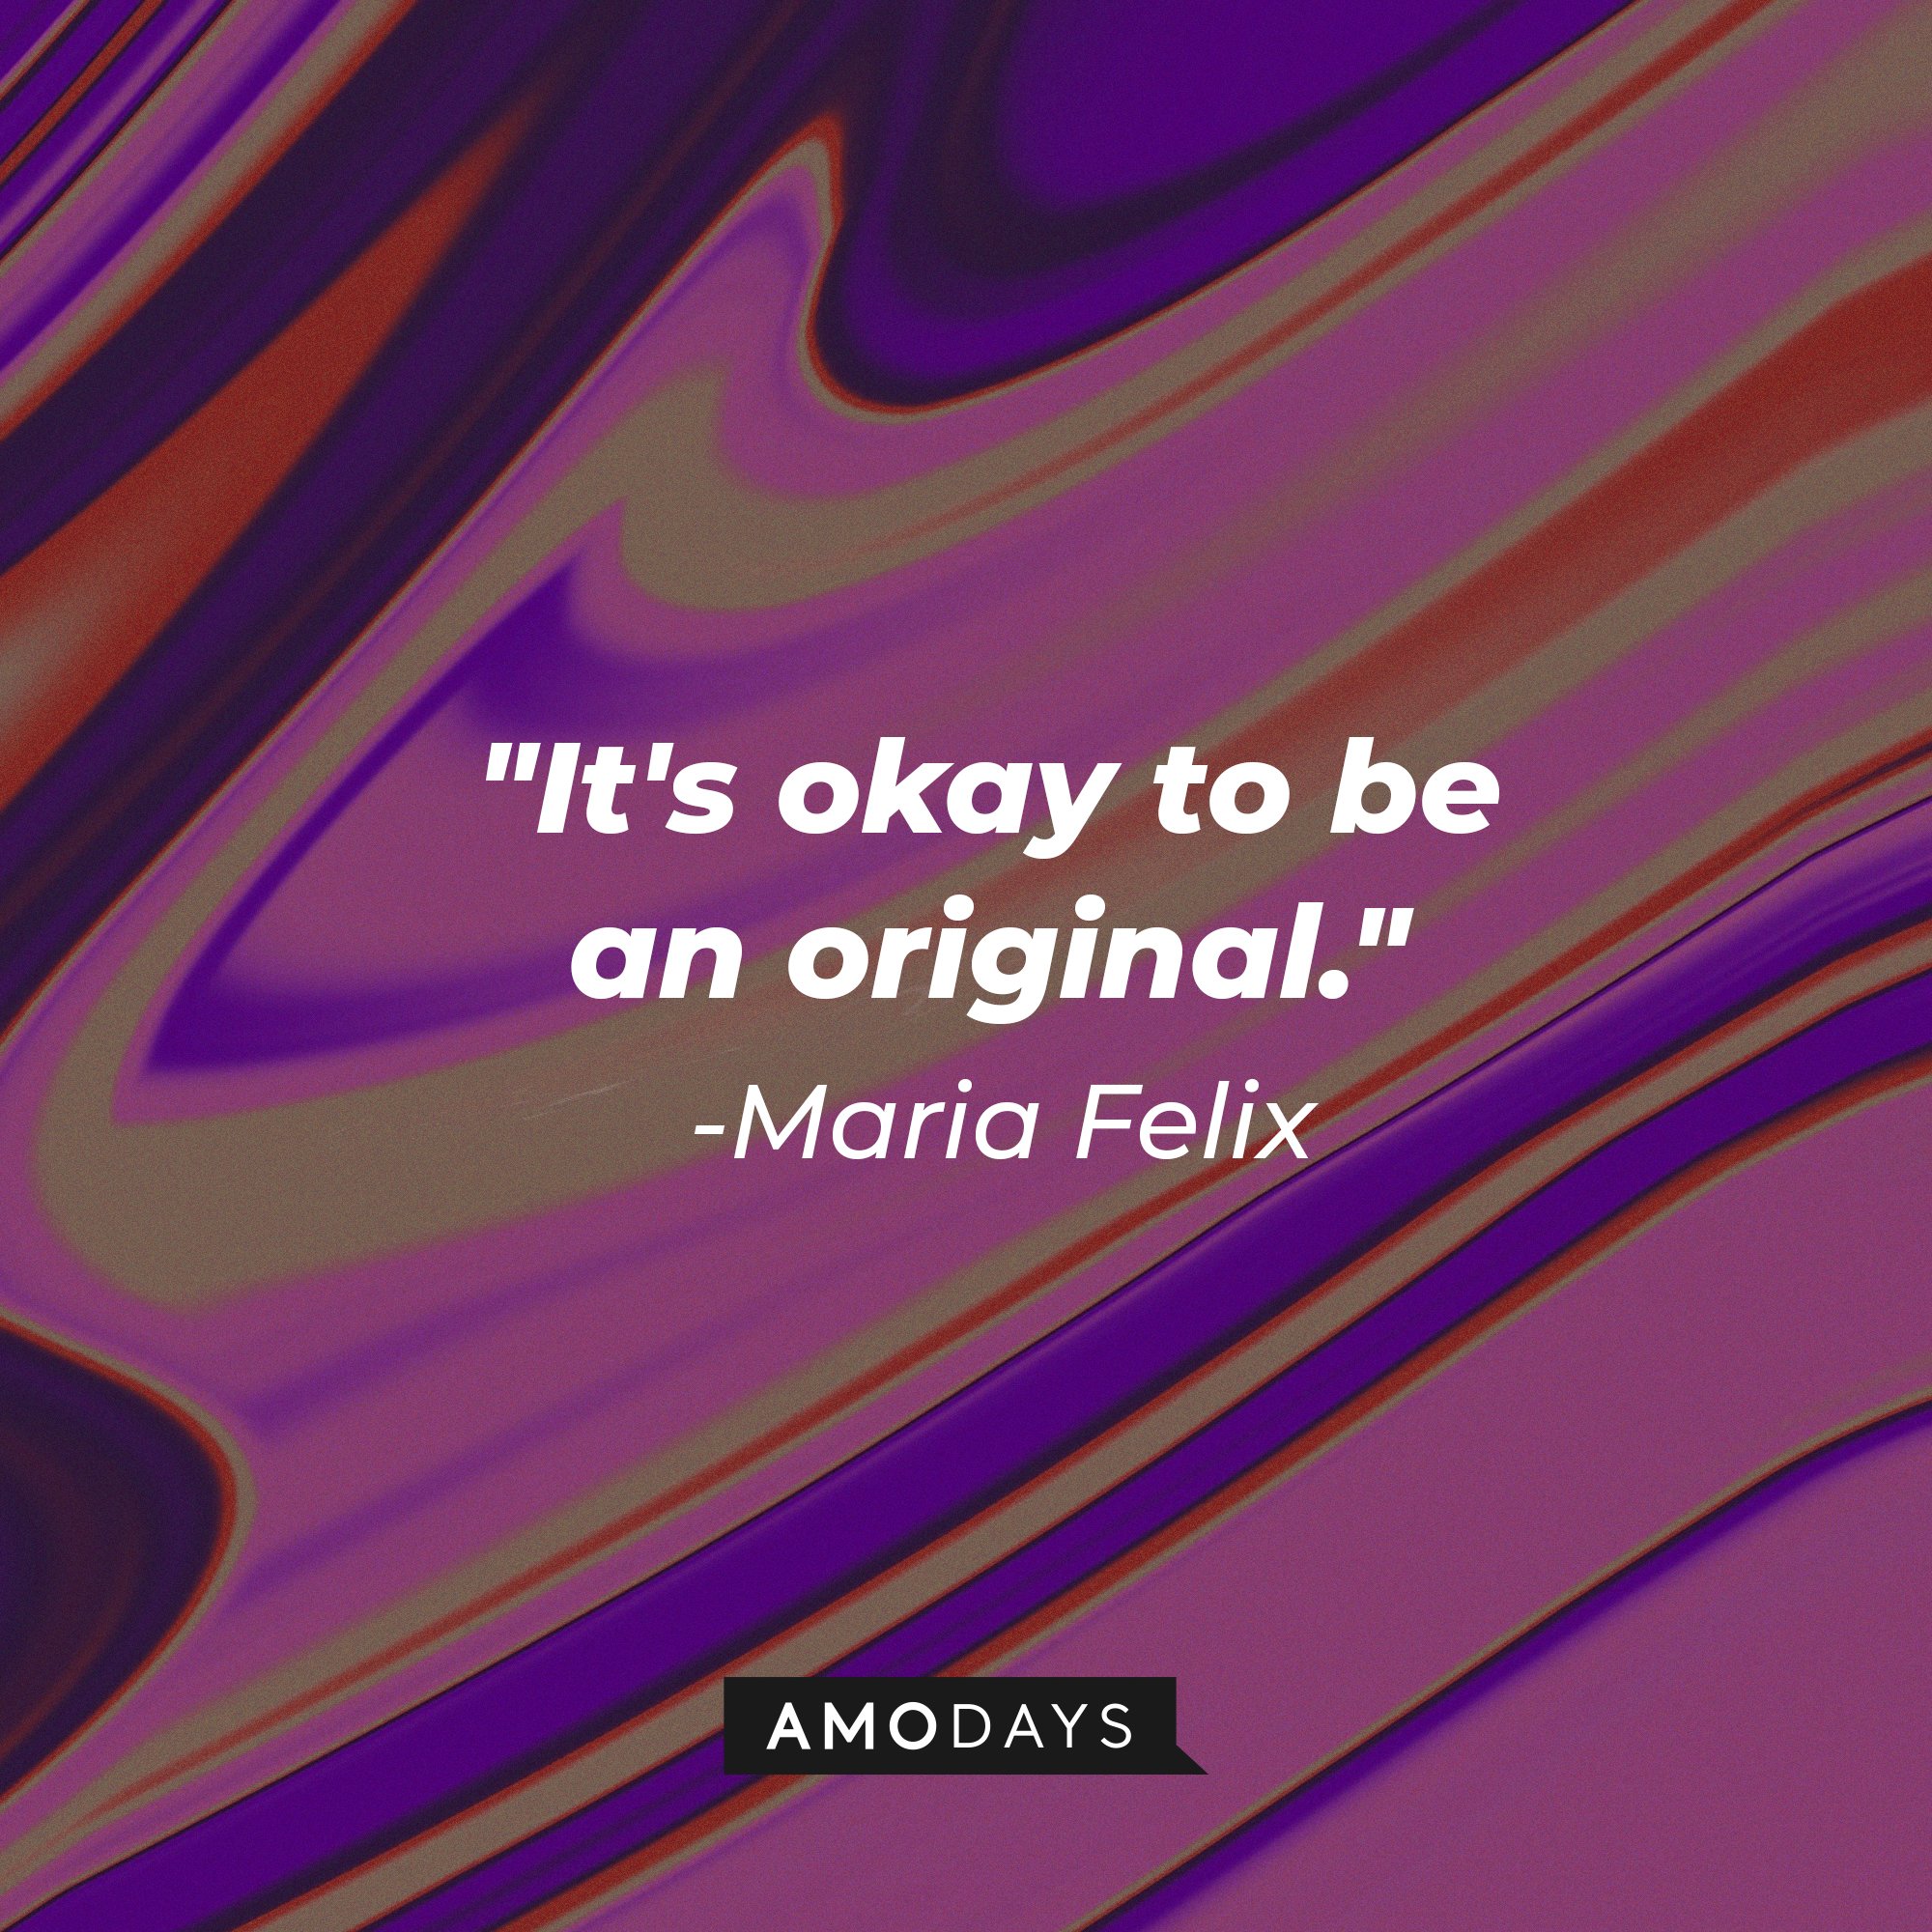 Maria Felix's quote: "It's okay to be an original." | Image: AmoDays